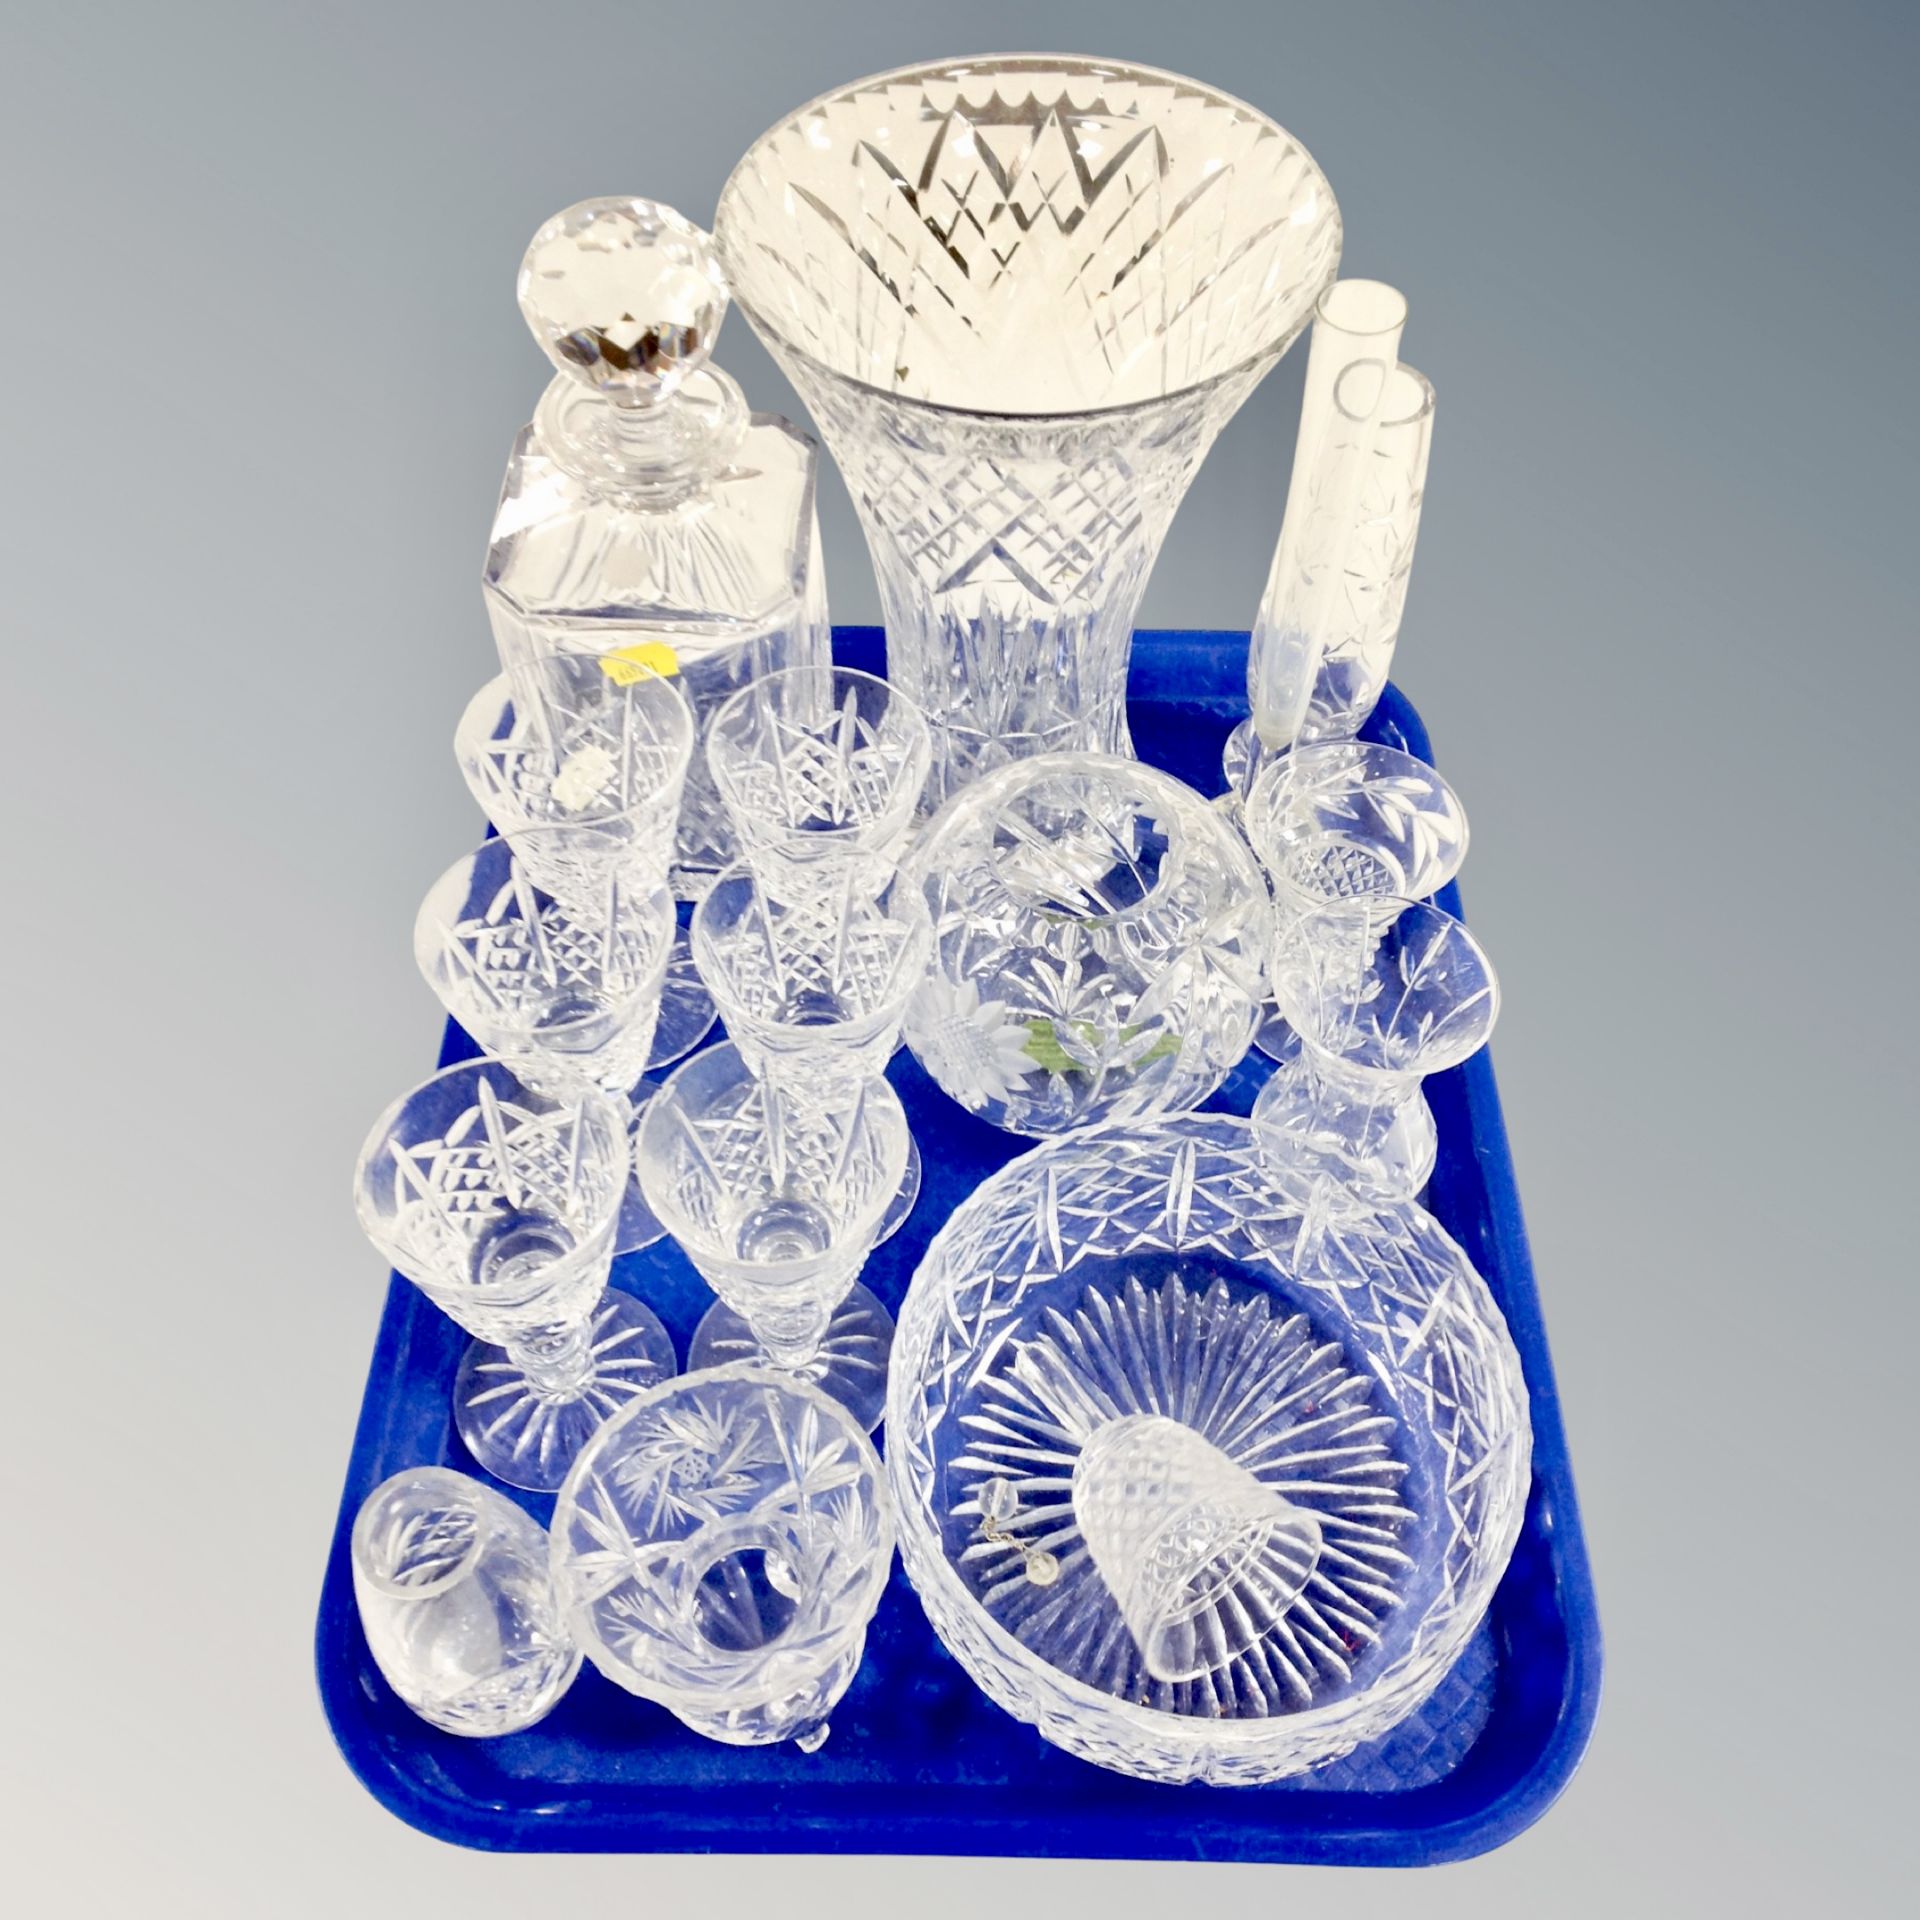 A tray of glass ware, crystal decanter, vases,